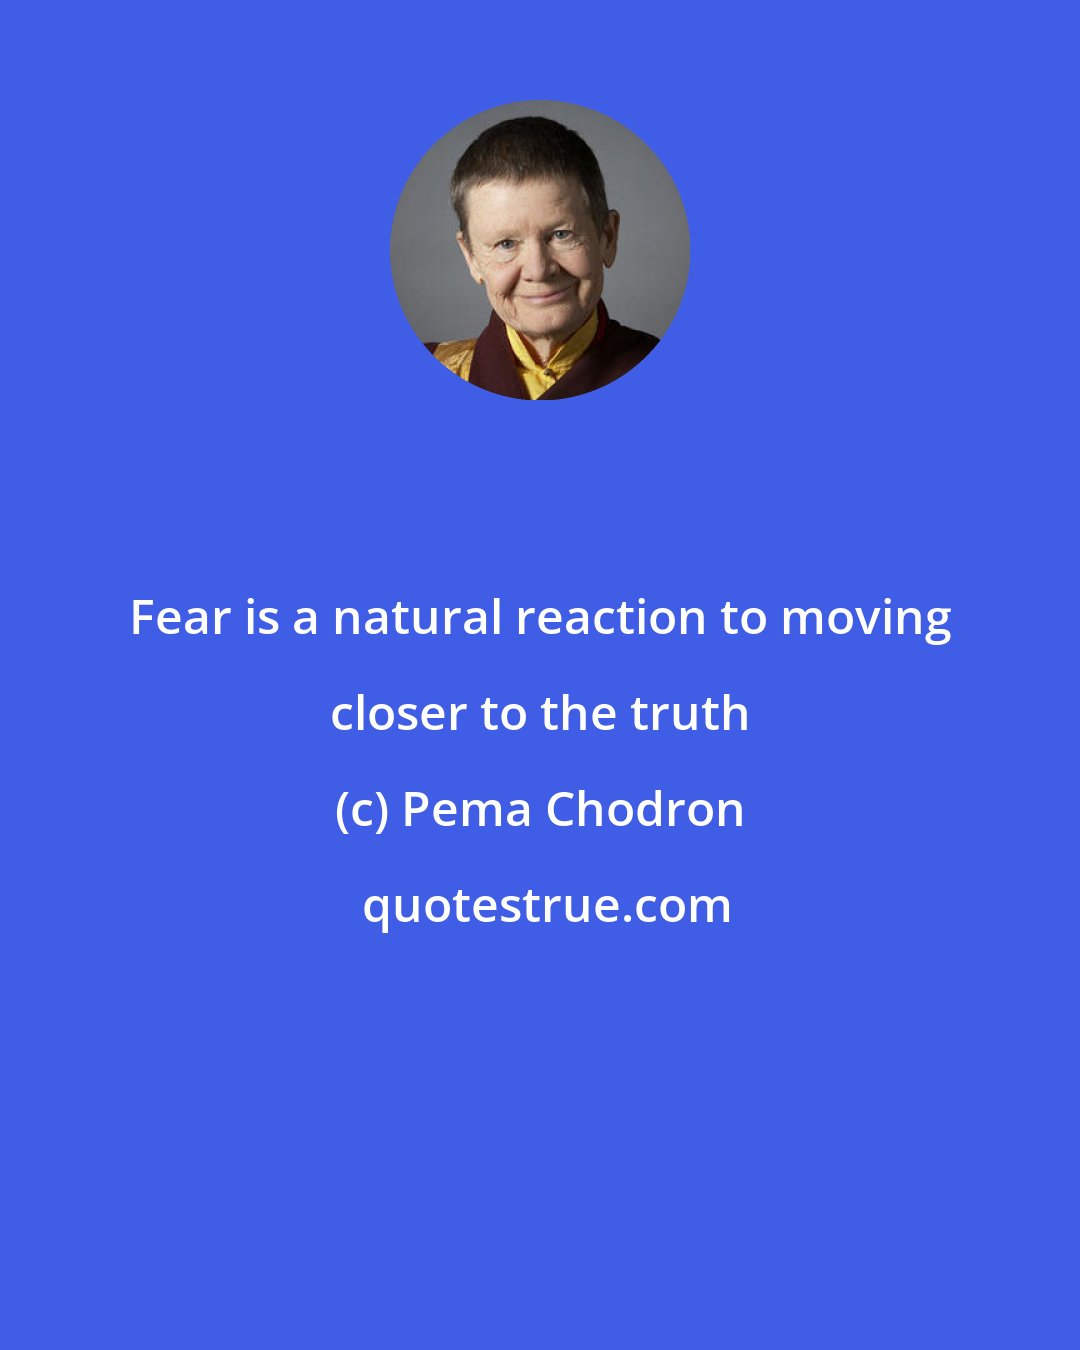 Pema Chodron: Fear is a natural reaction to moving closer to the truth